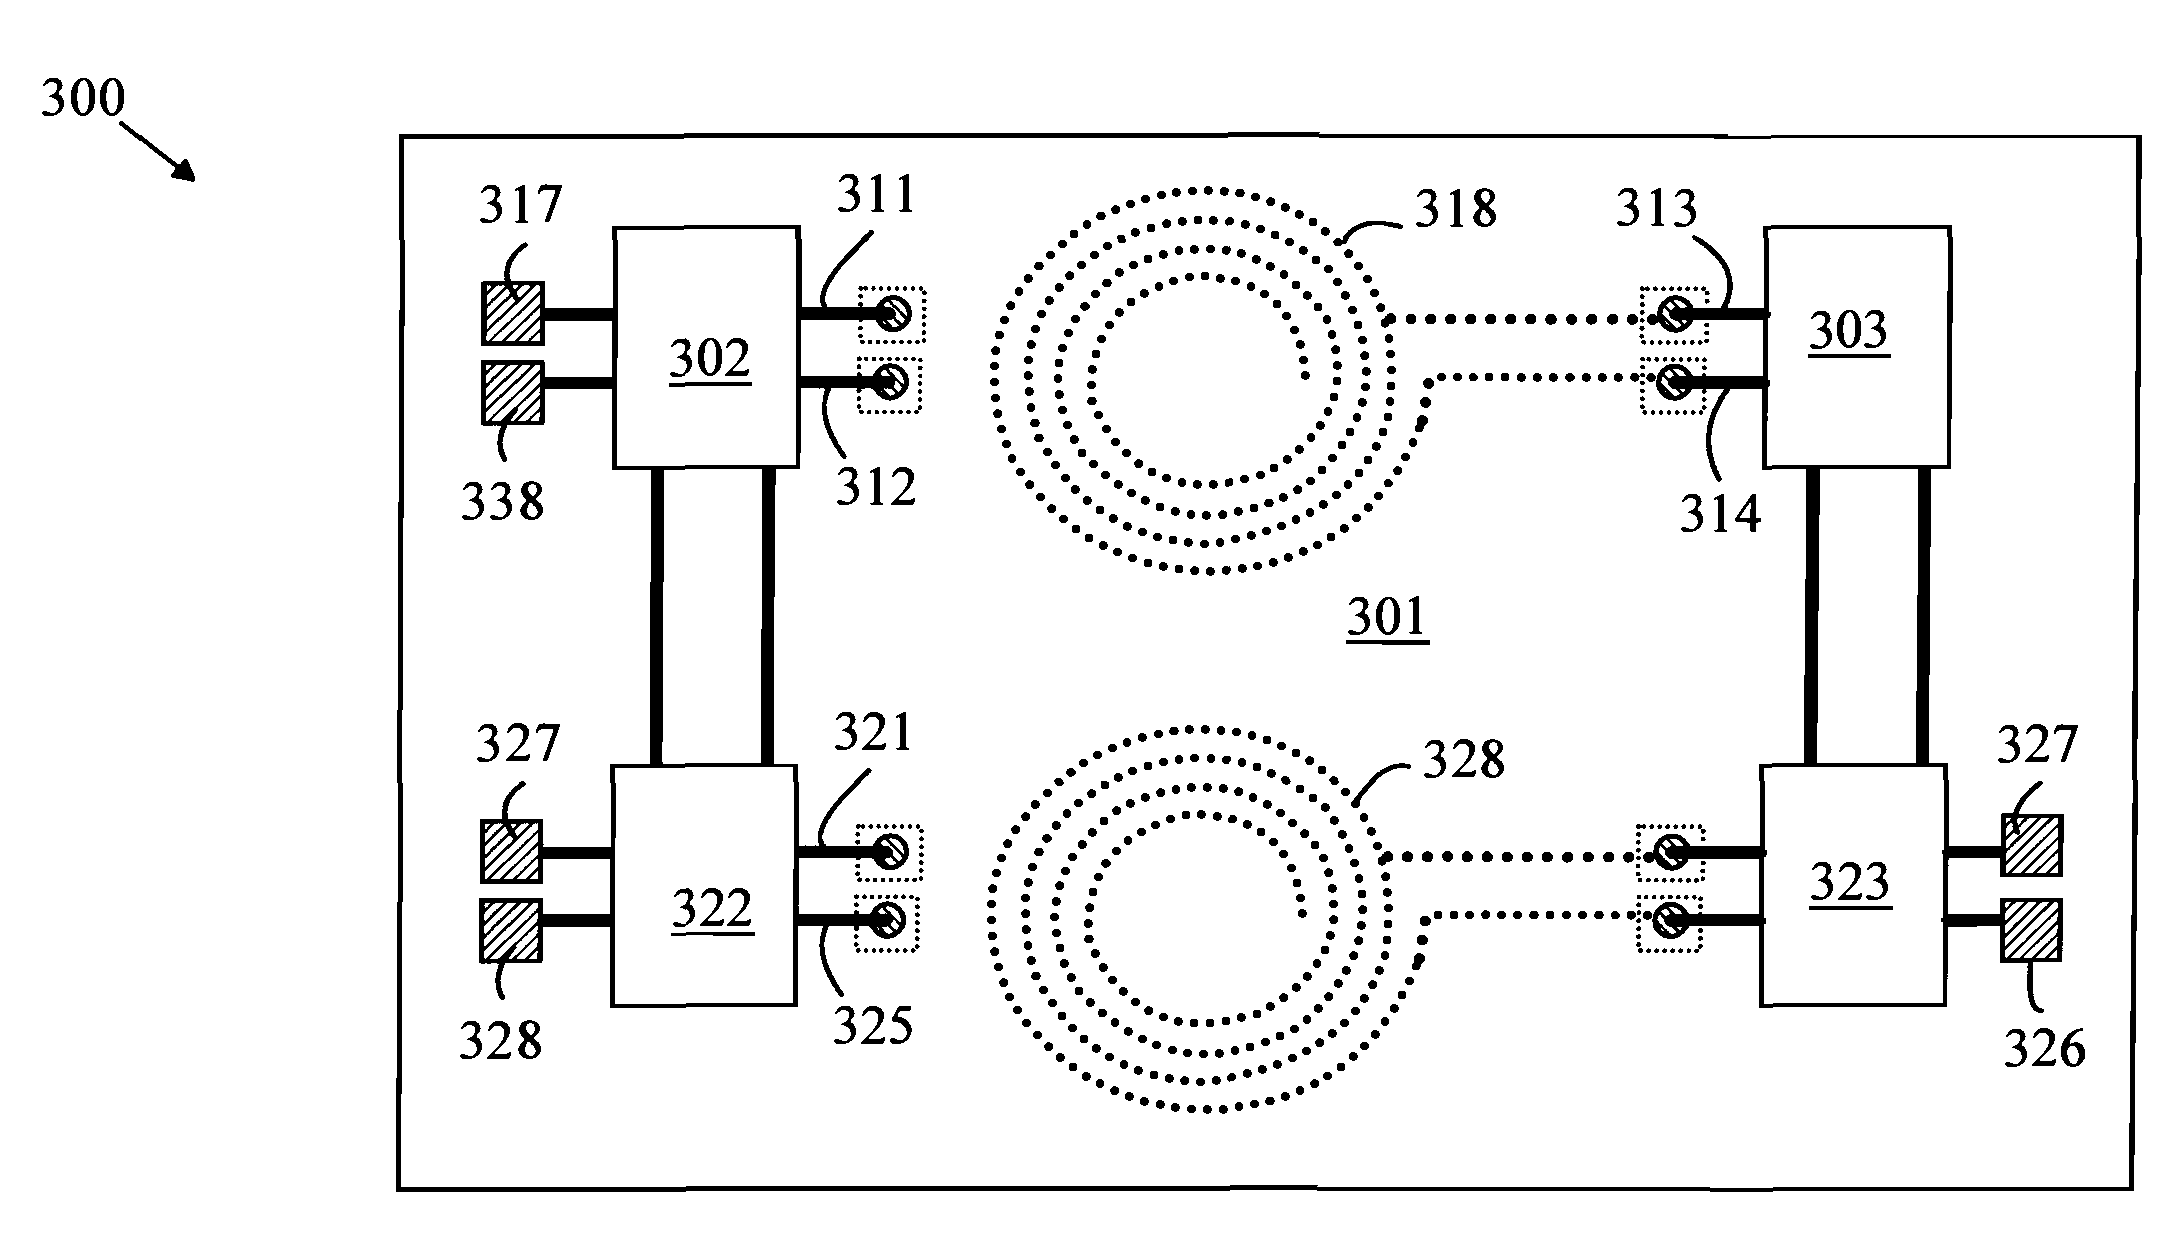 Miniature Transformers Adapted for use in Galvanic Isolators and the Like